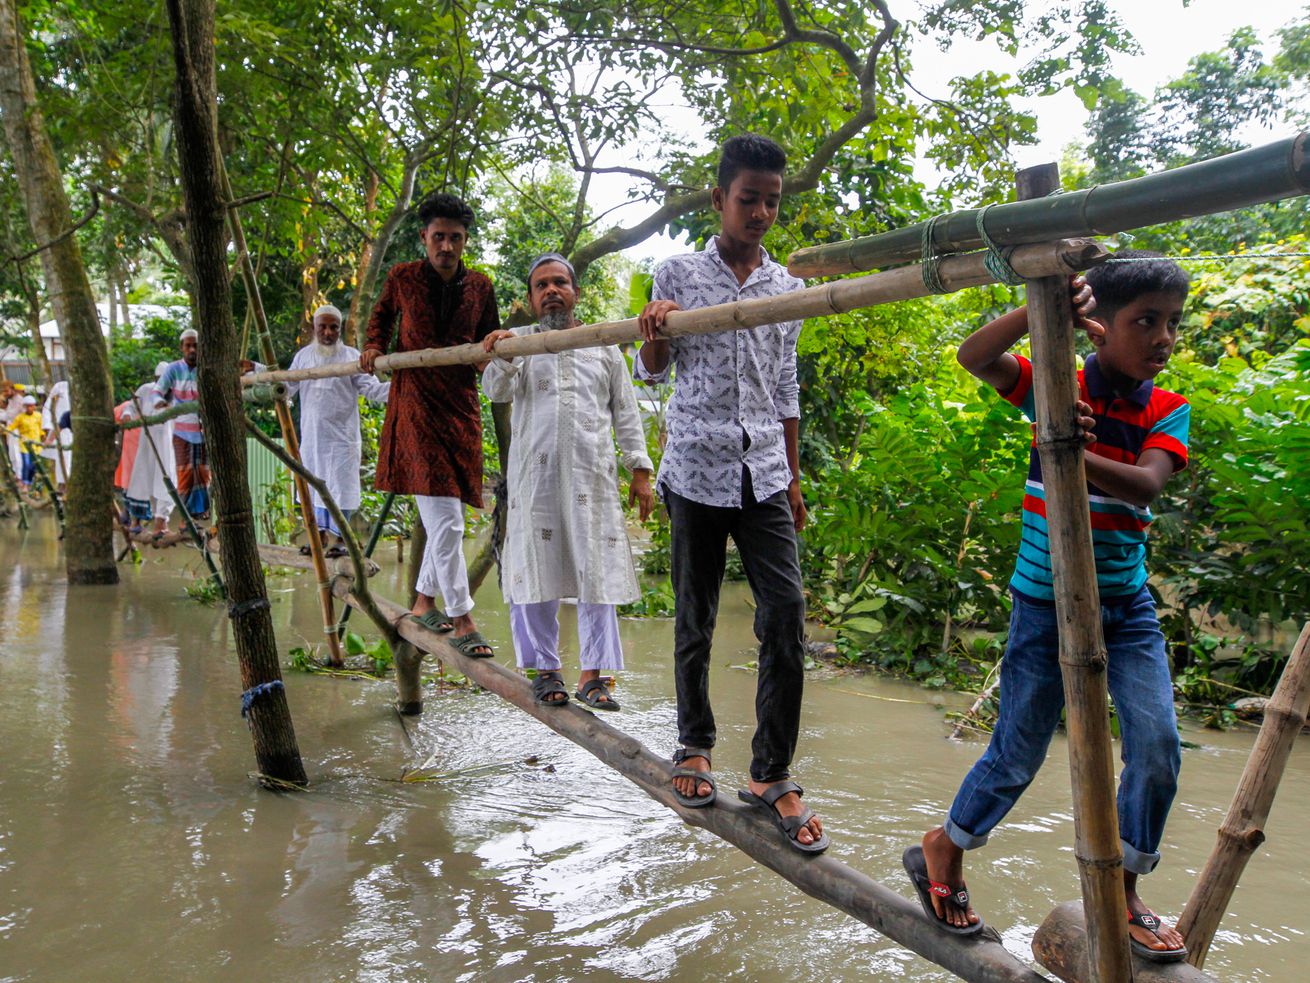 People walking on a makeshift bridge over muddy floodwaters in a wooded area.